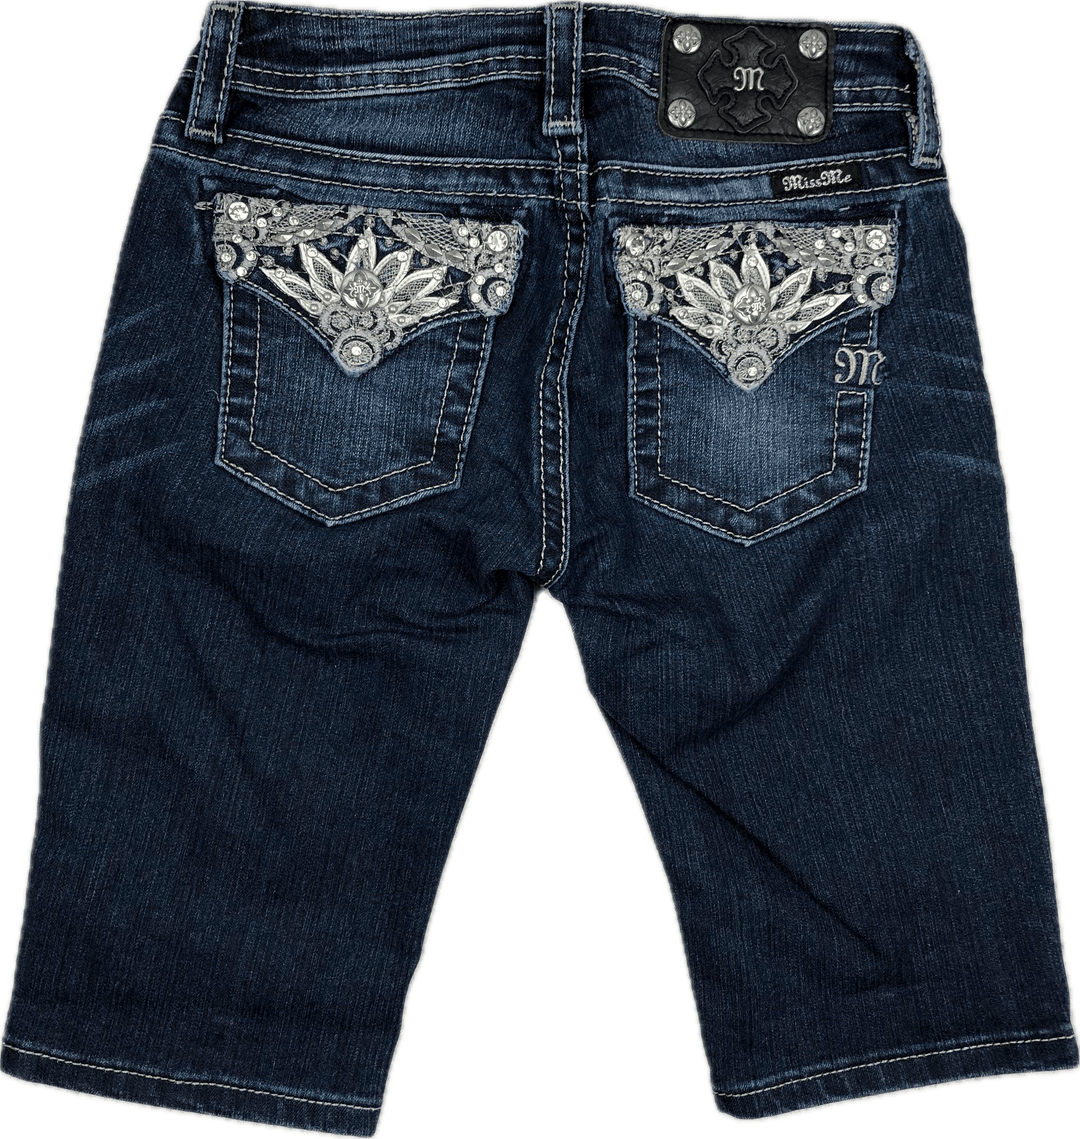 NEW - Miss Me Girls Jewelled Long Shorts- Size 14 - Jean Pool